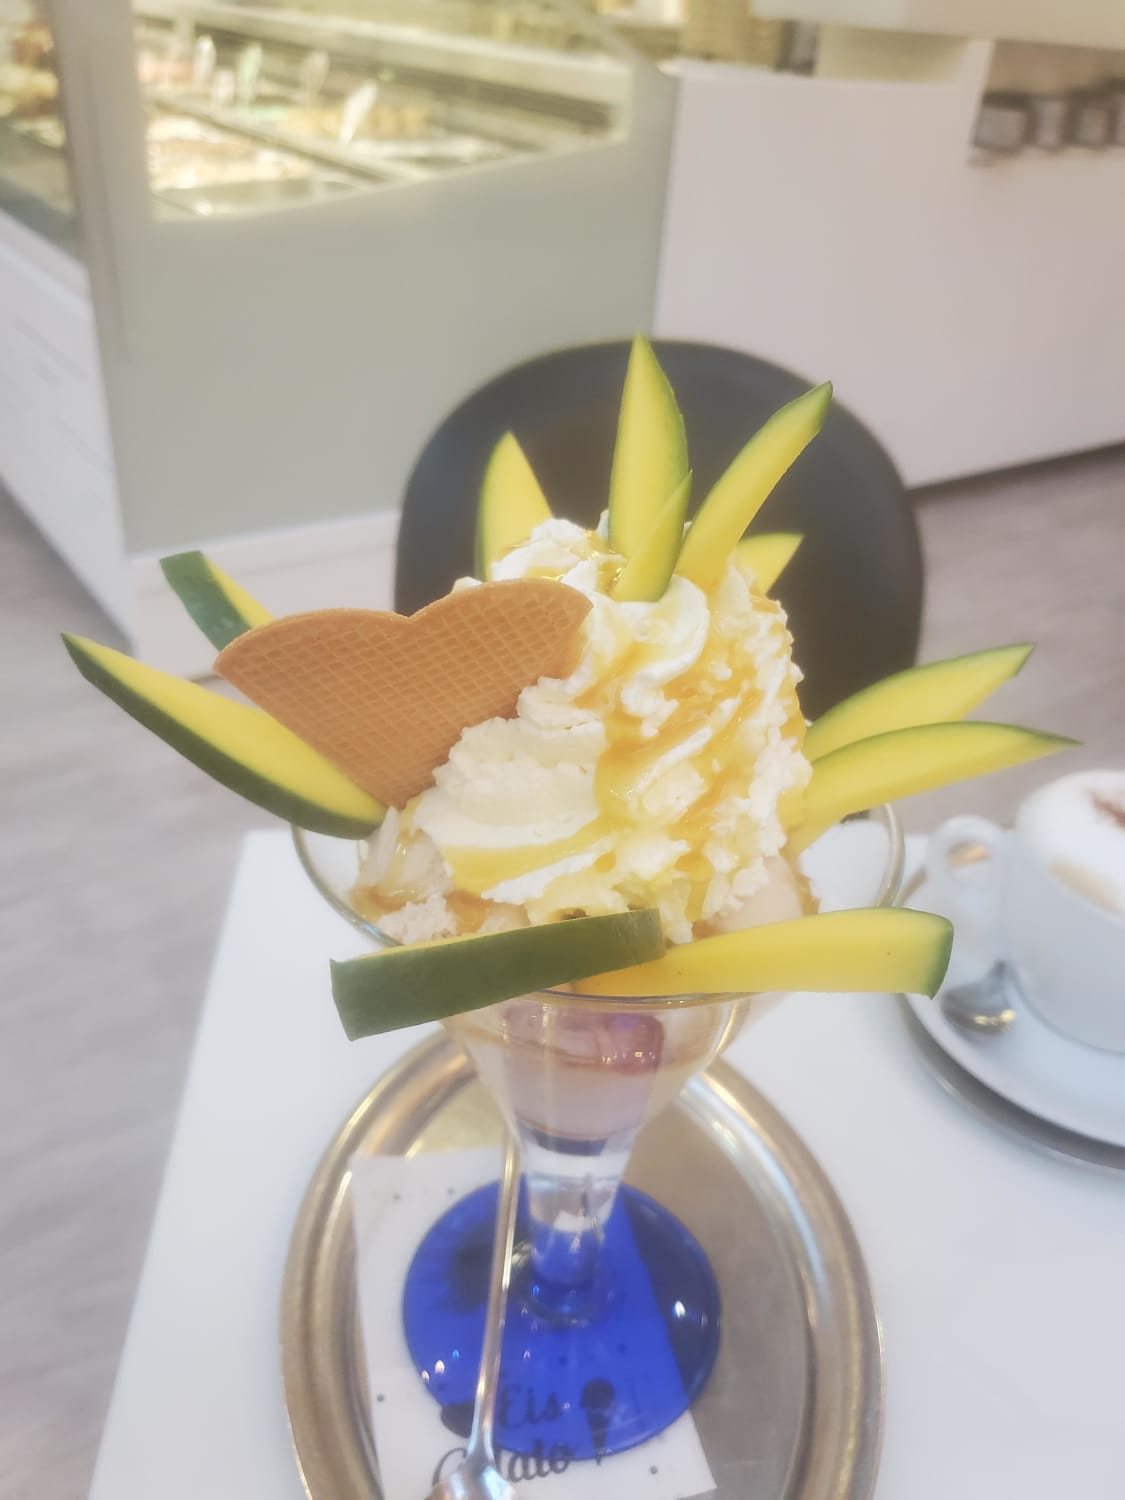 (Located at an Icecream shop, in Kaufpark, Göttingen.) An icecream glass with freshly made Hazelnut icecream, perfect mango slices, thick and sturdy whipped cream and a heart wafer. Was very good, got to choose the Hazelnut flavor as well ^ ^